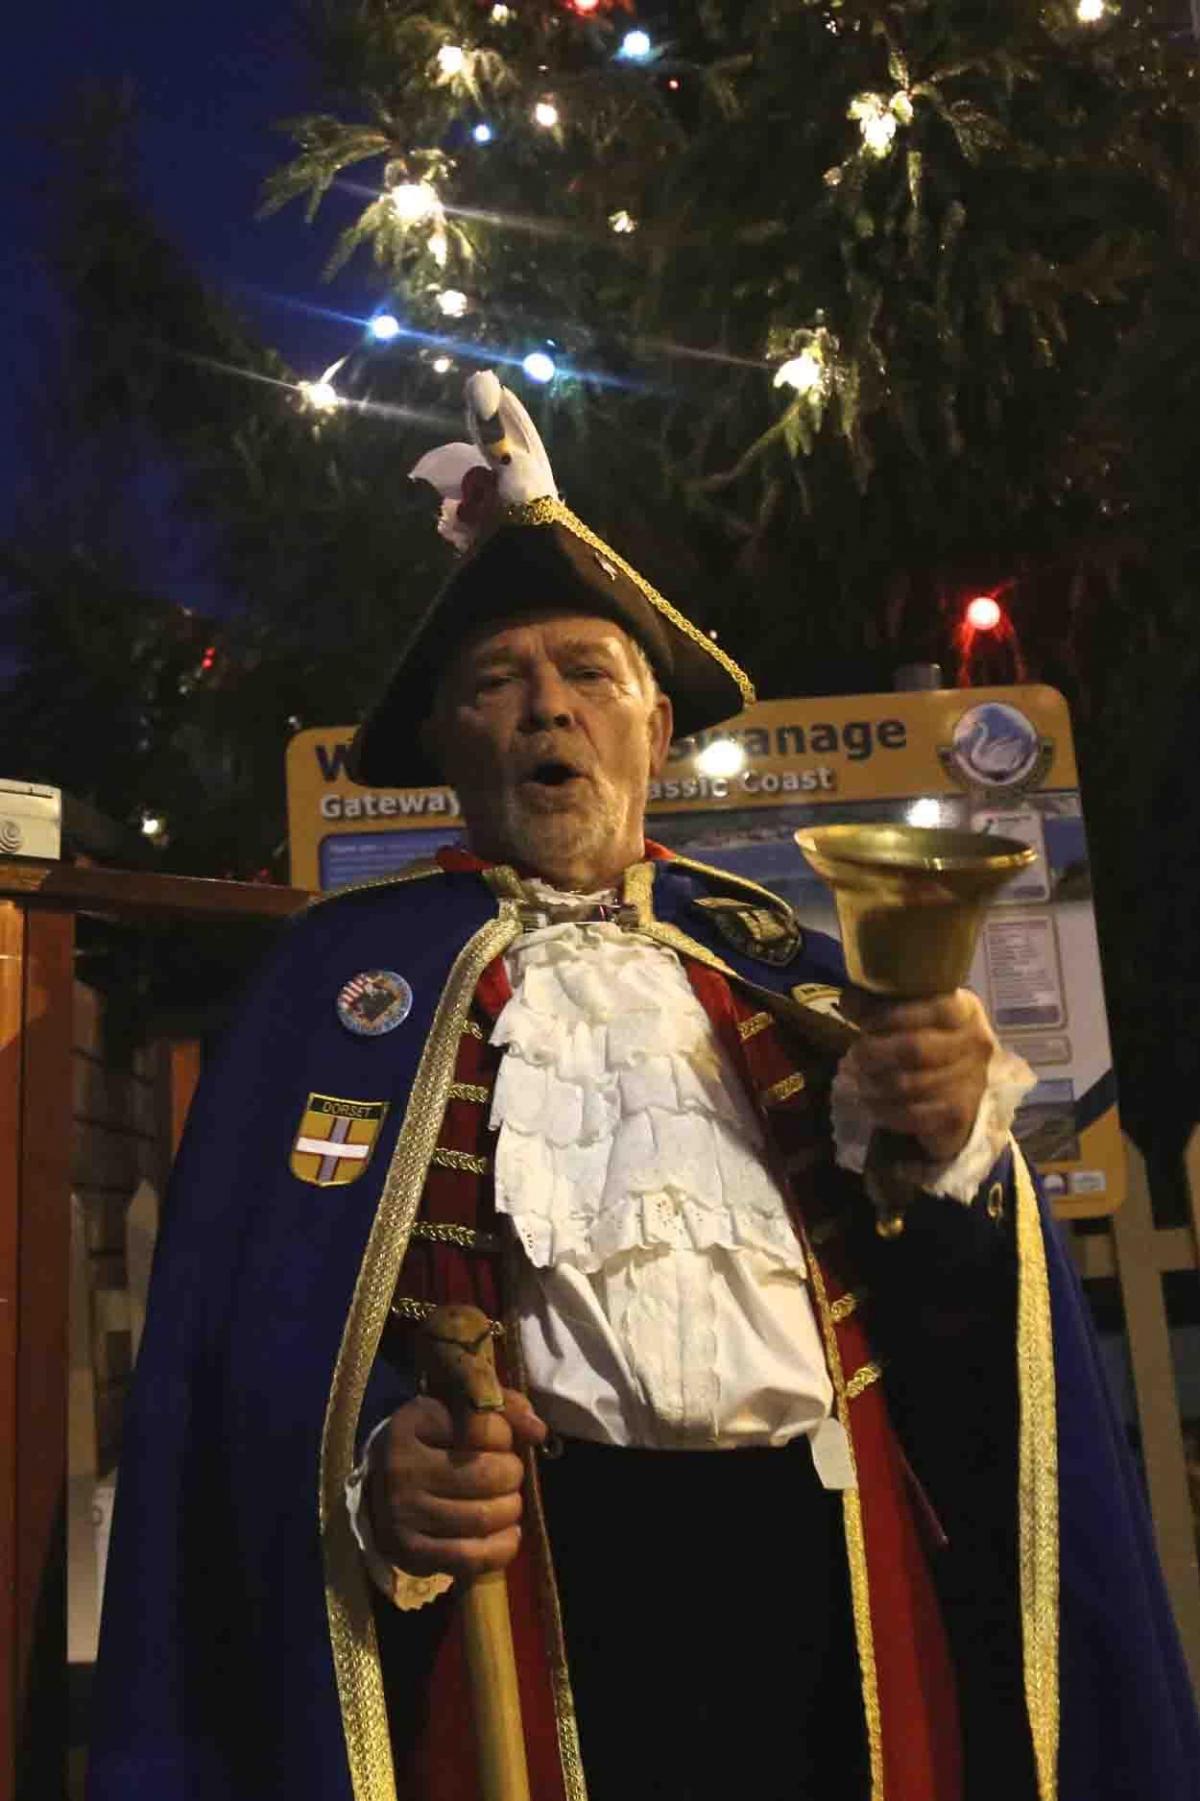 All our pictures from Swanage and Corfe Castle Christmas lights switch-on by Sam Sheldon.